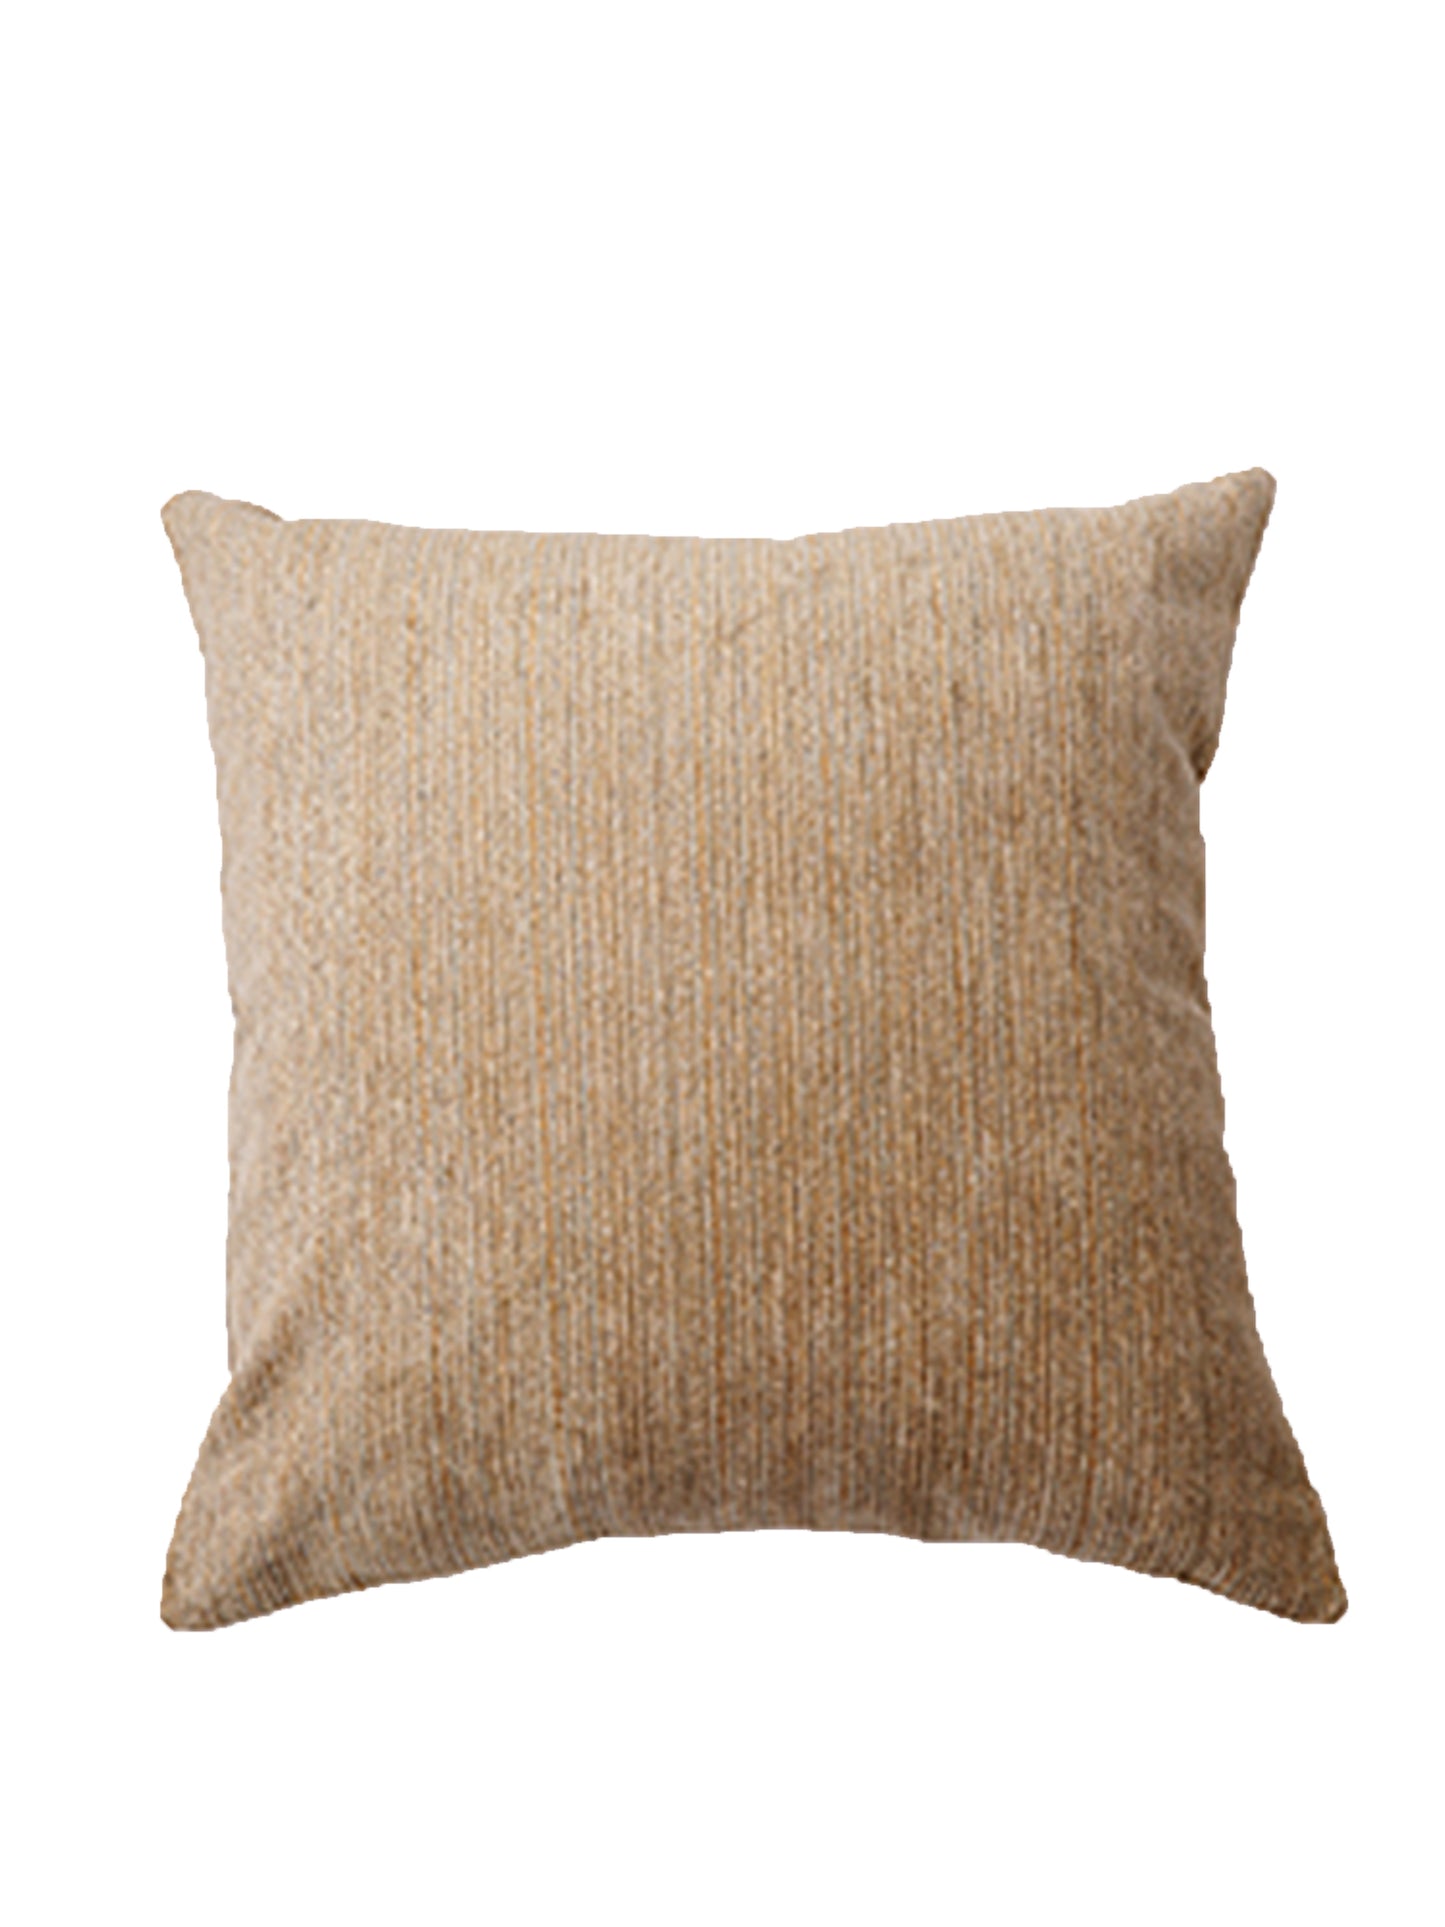 Cushion Cover Polyster  Blend Self Textured Beige - 24"X24"